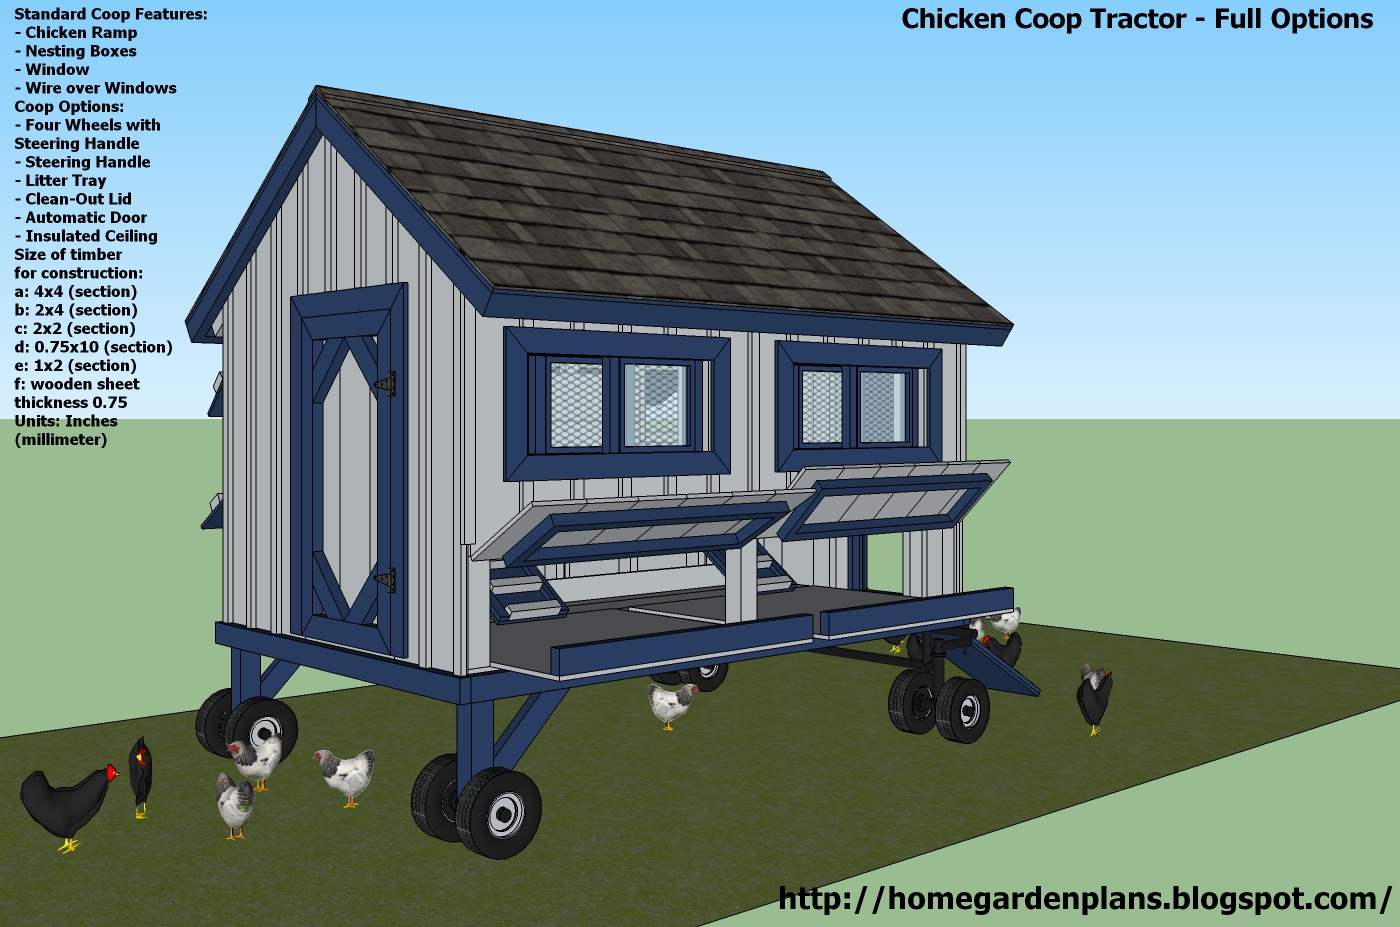 ... - Free Chicken Coop Tractor Plans - How to build a Chicken Coop